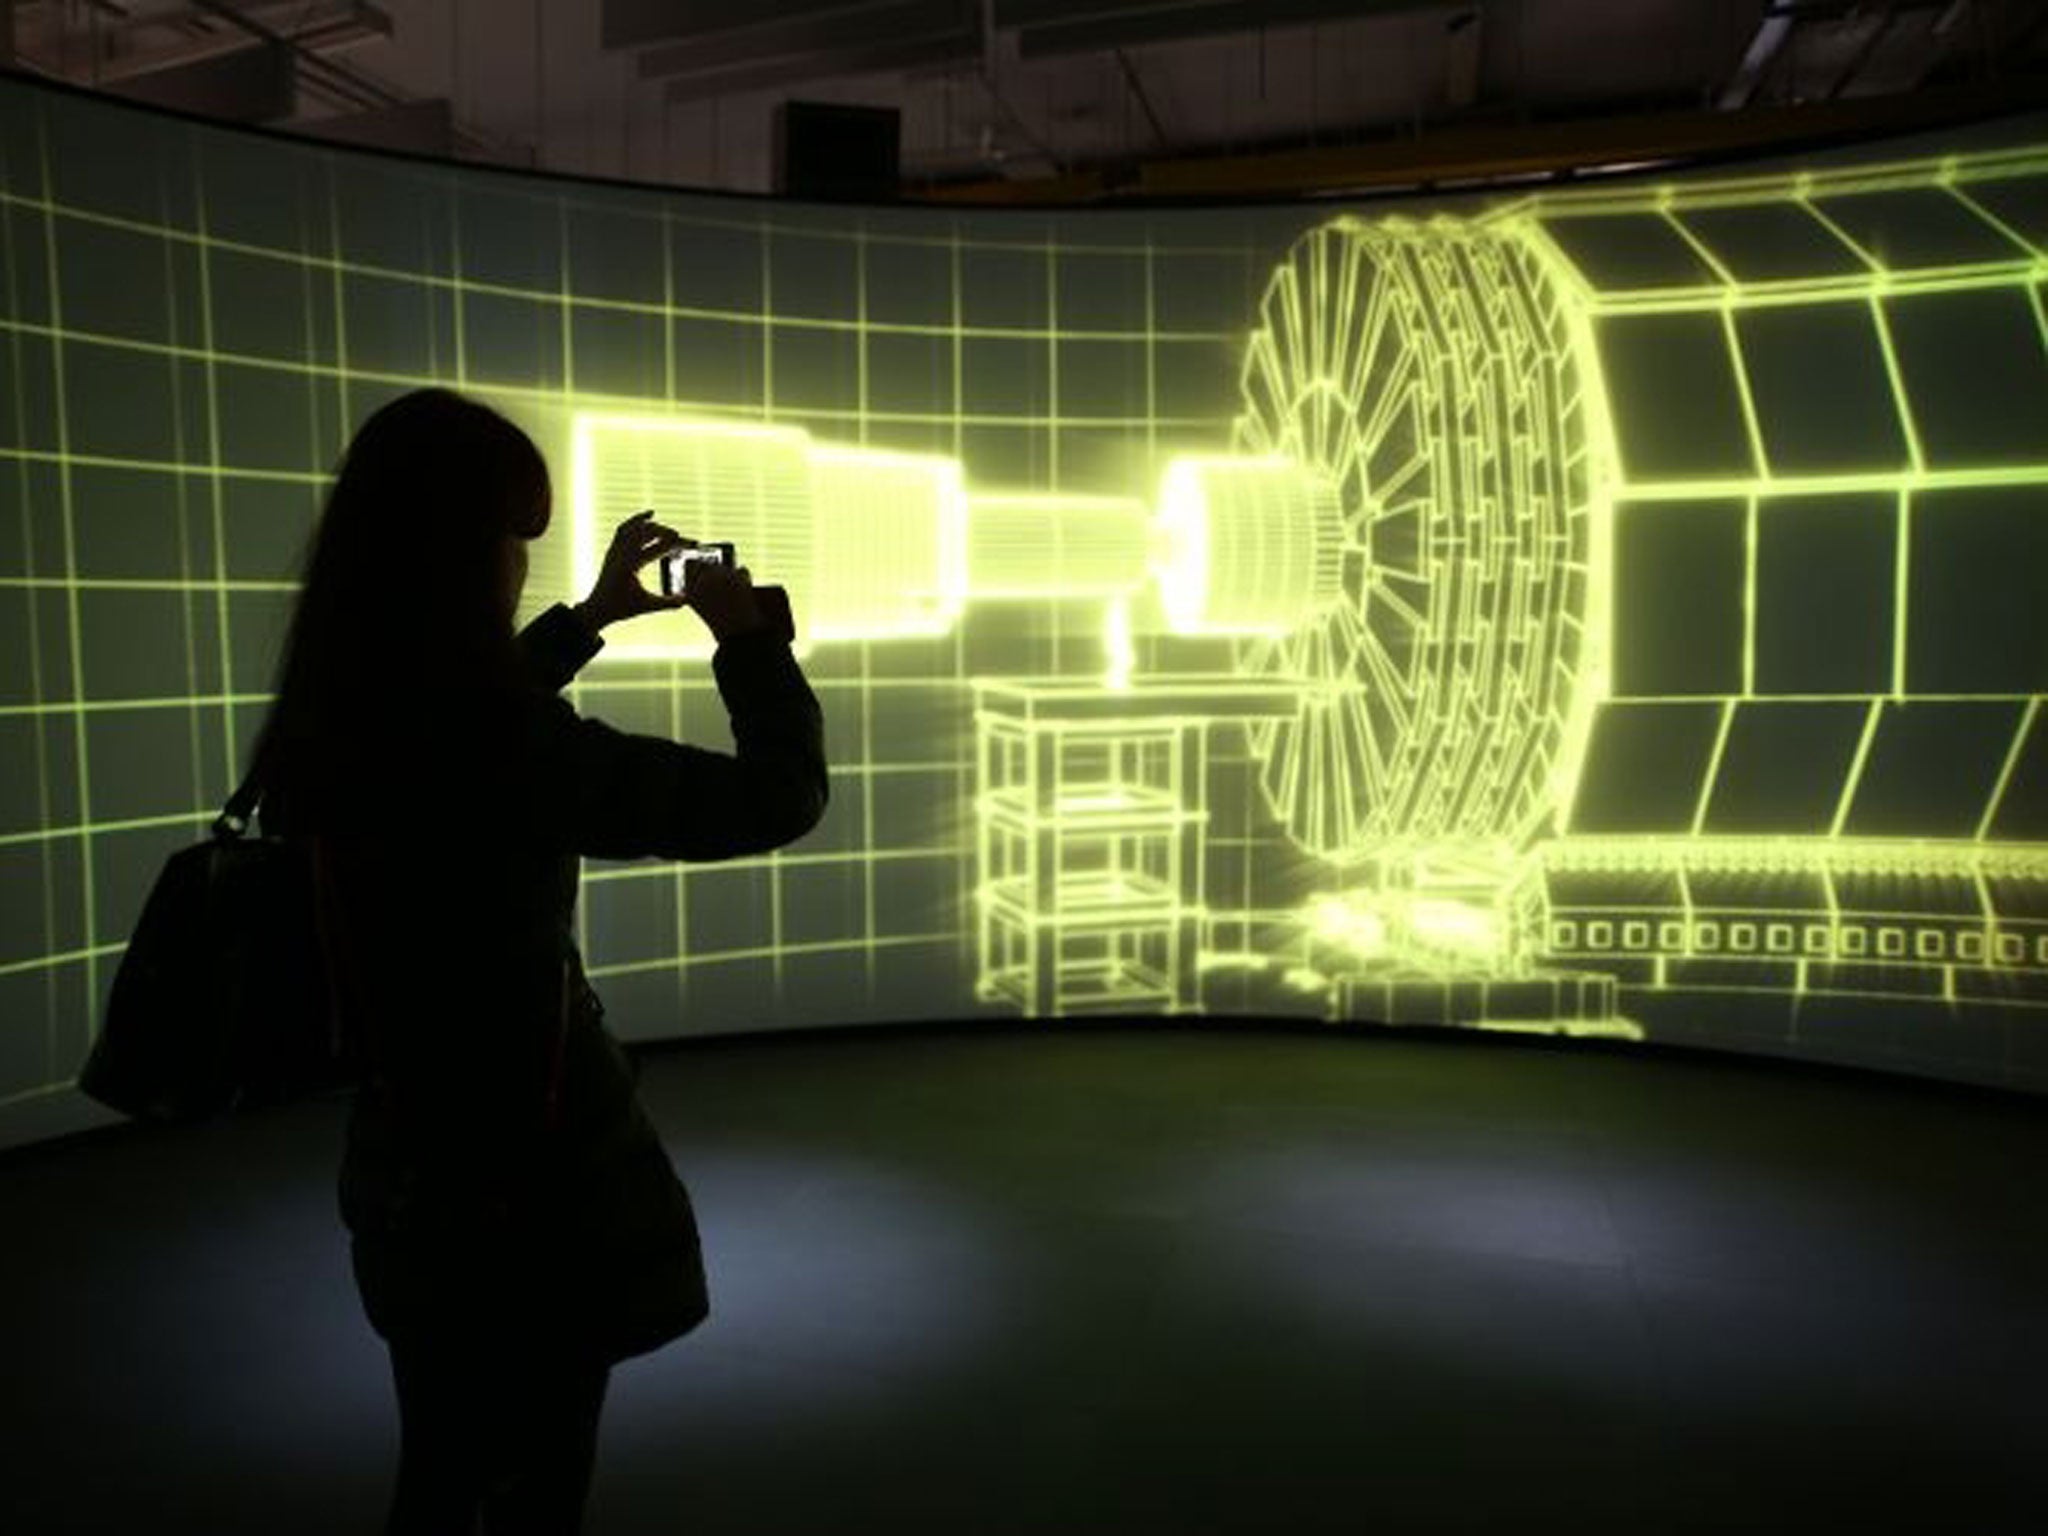 A visitor to the Science Museum takes a phone photograph of a video projection showing the workings of the Large Hadron Collider at the 'Collider' exhibition